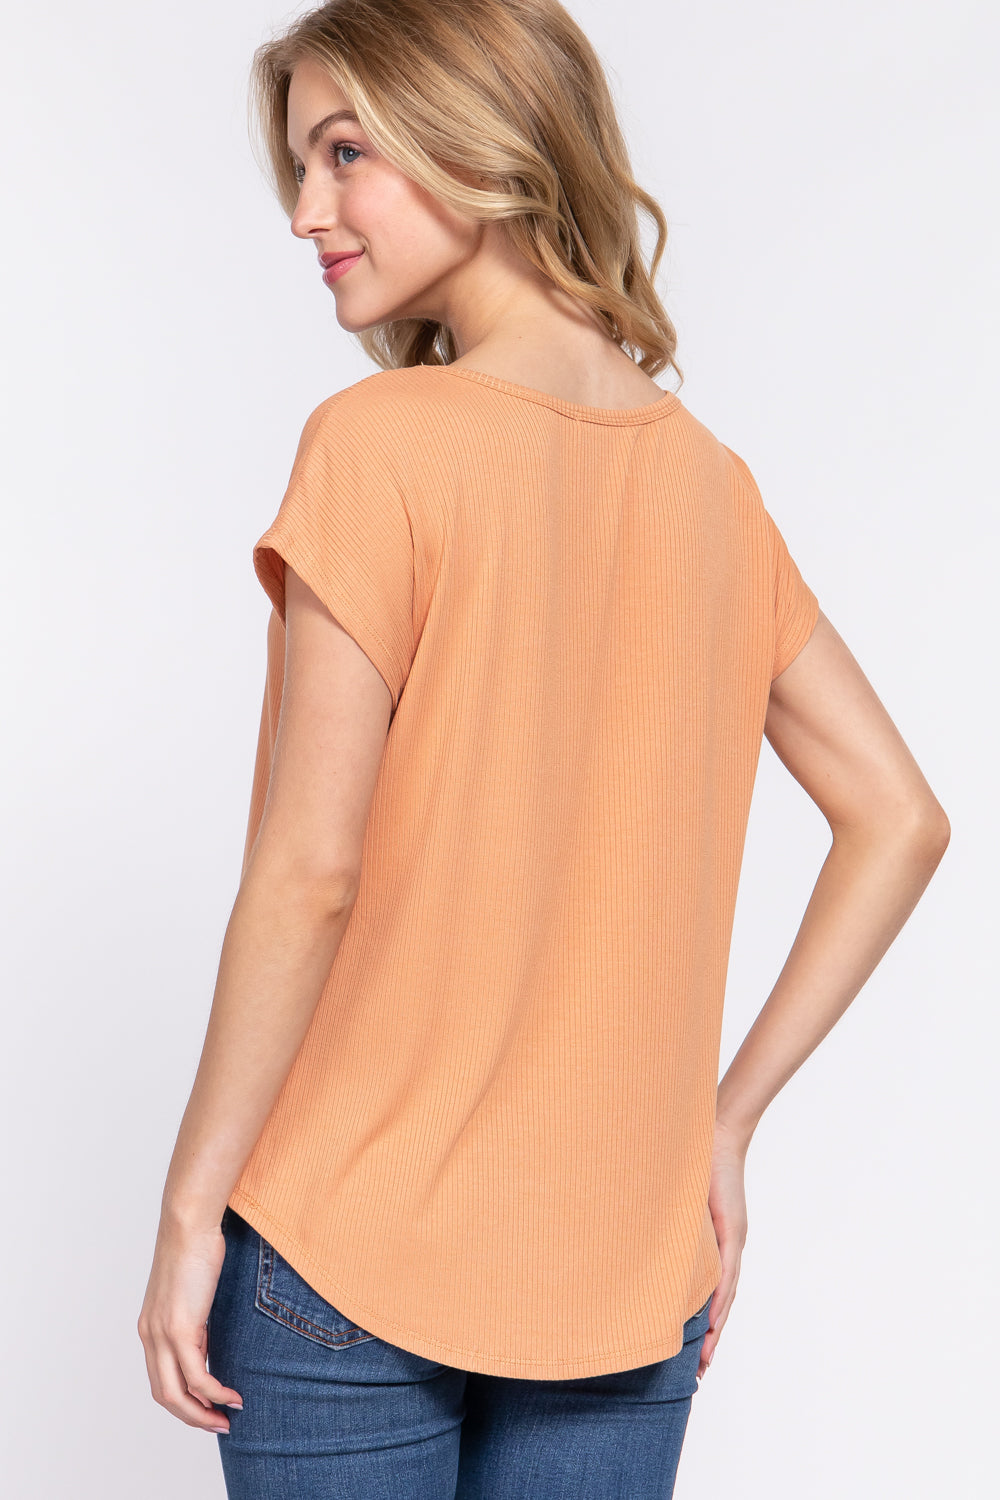 Ribbed Dolman Sleeve Tee in Apricot